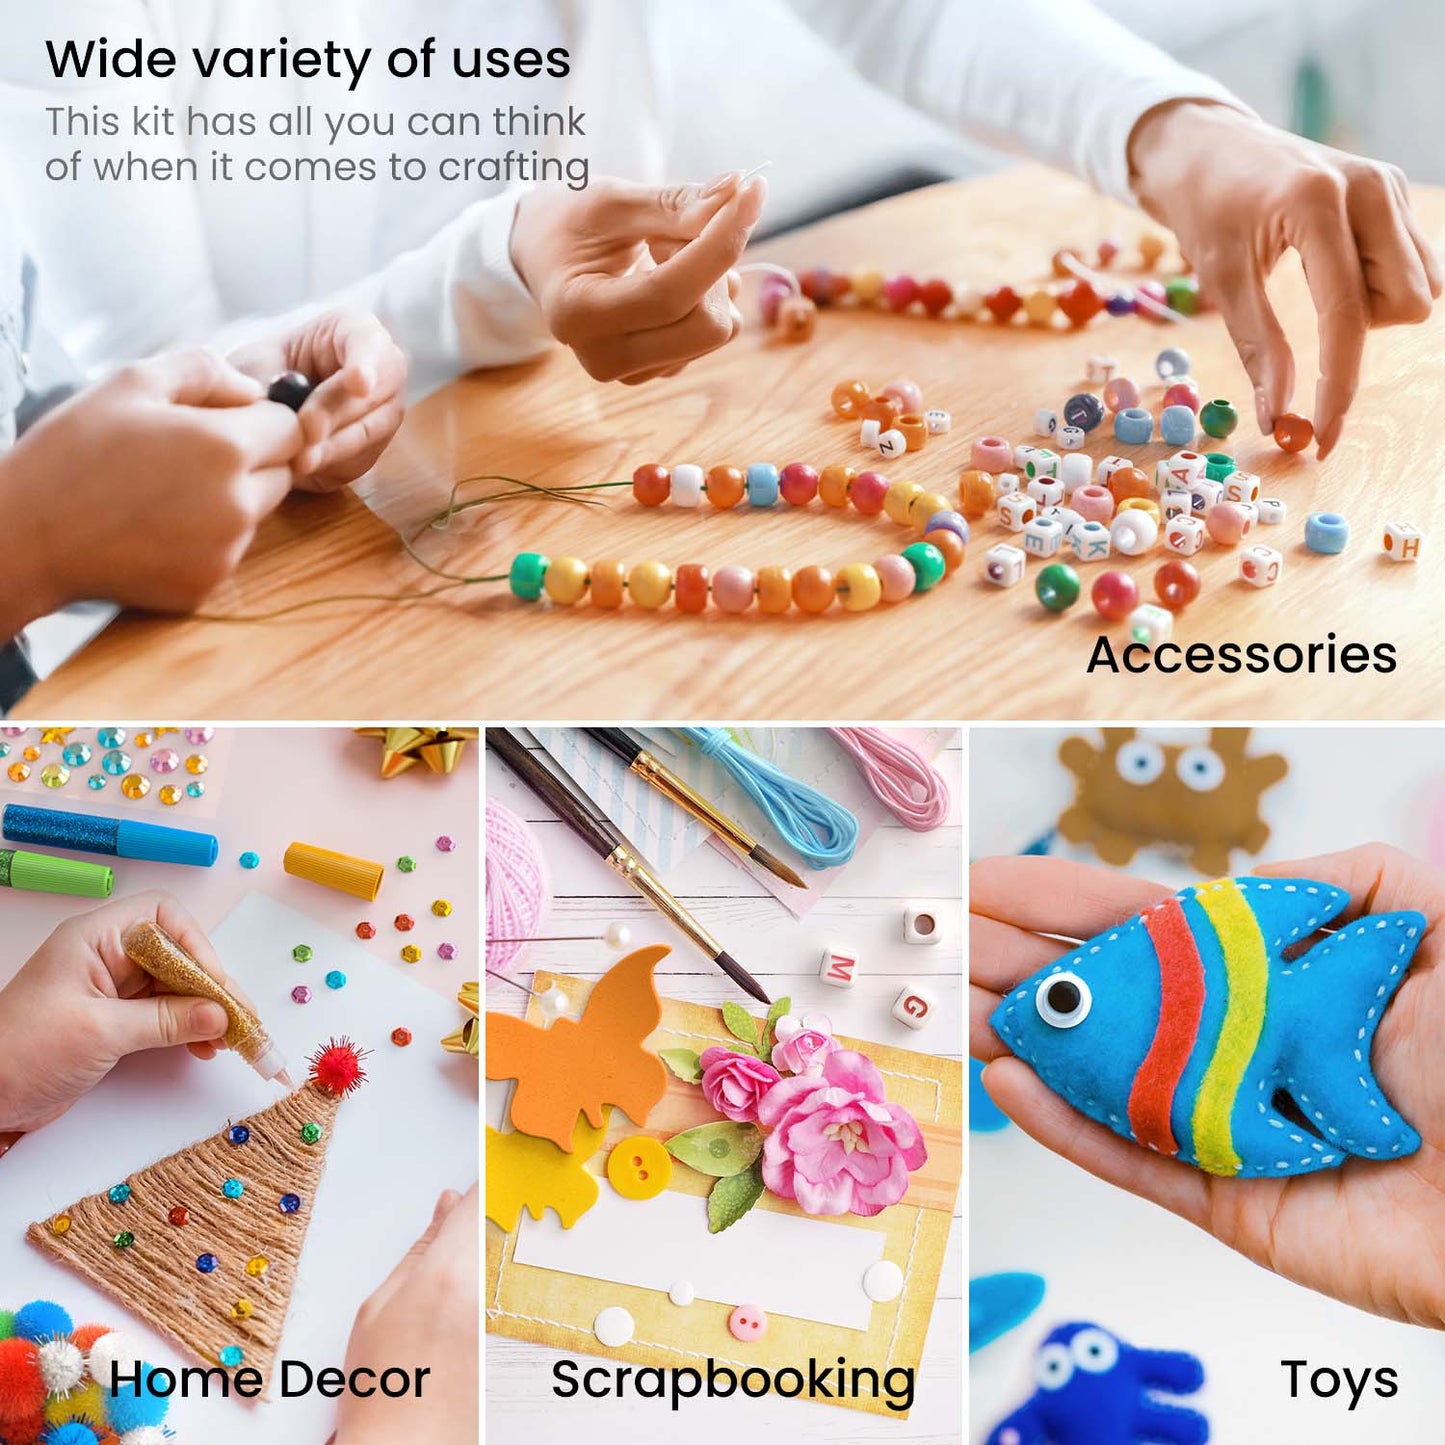 Ideas of how to use the Ultimate Craft Kit: Scrapbooking, toys, home decor and crafting accessories